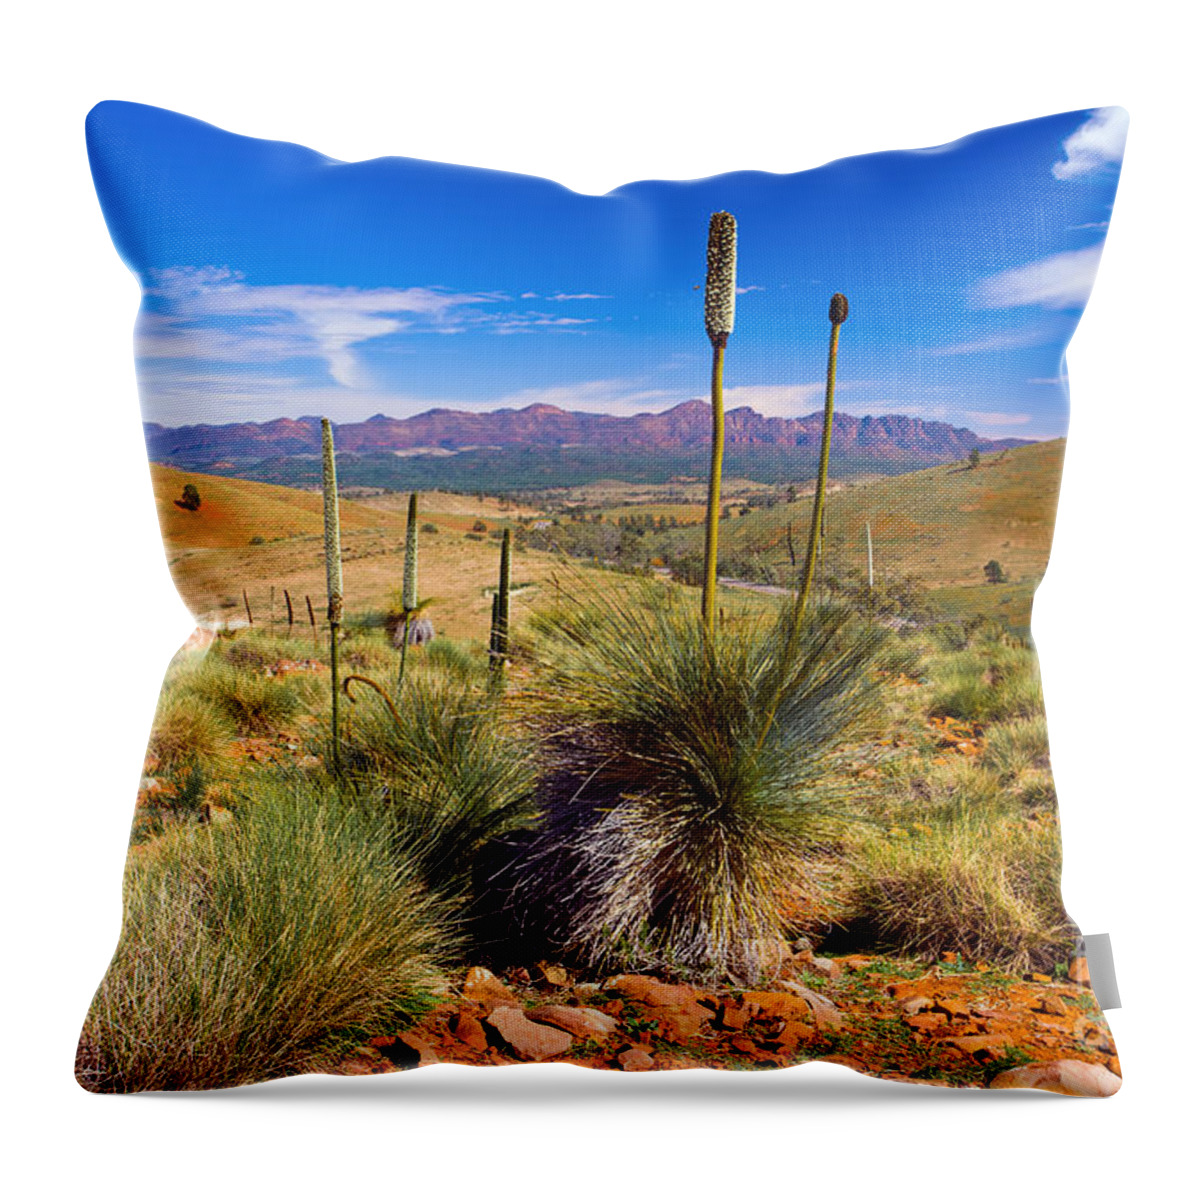 Hucks Lookout Flinders Ranges Wilpena Pound Outback Landscape Landscapes South Australia Australian Throw Pillow featuring the photograph Hucks Lookout by Bill Robinson